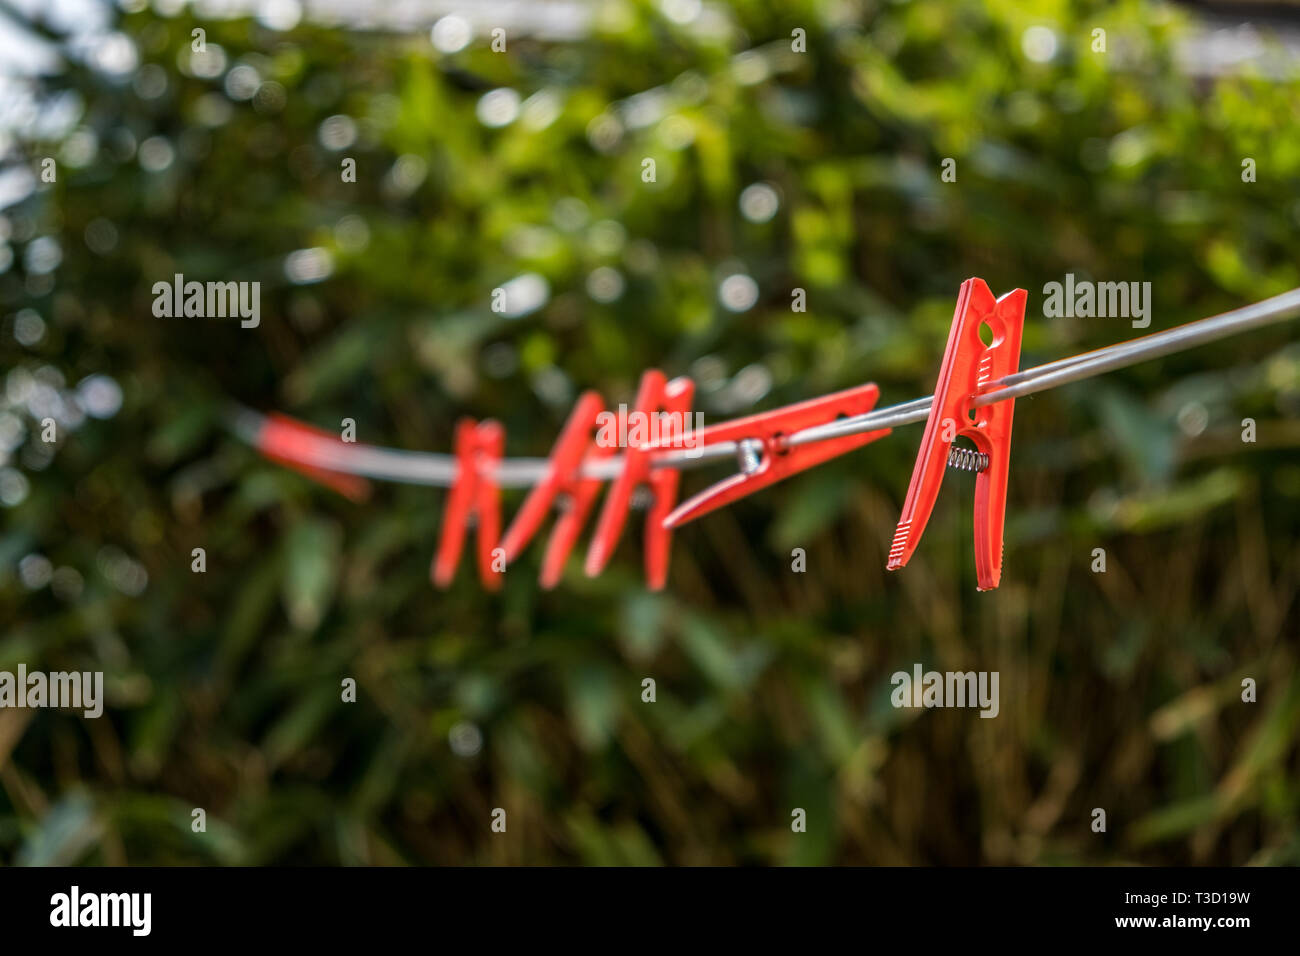 Red plastic clothes pegs on a clothes line against the background of blurred green bush. Stock Photo